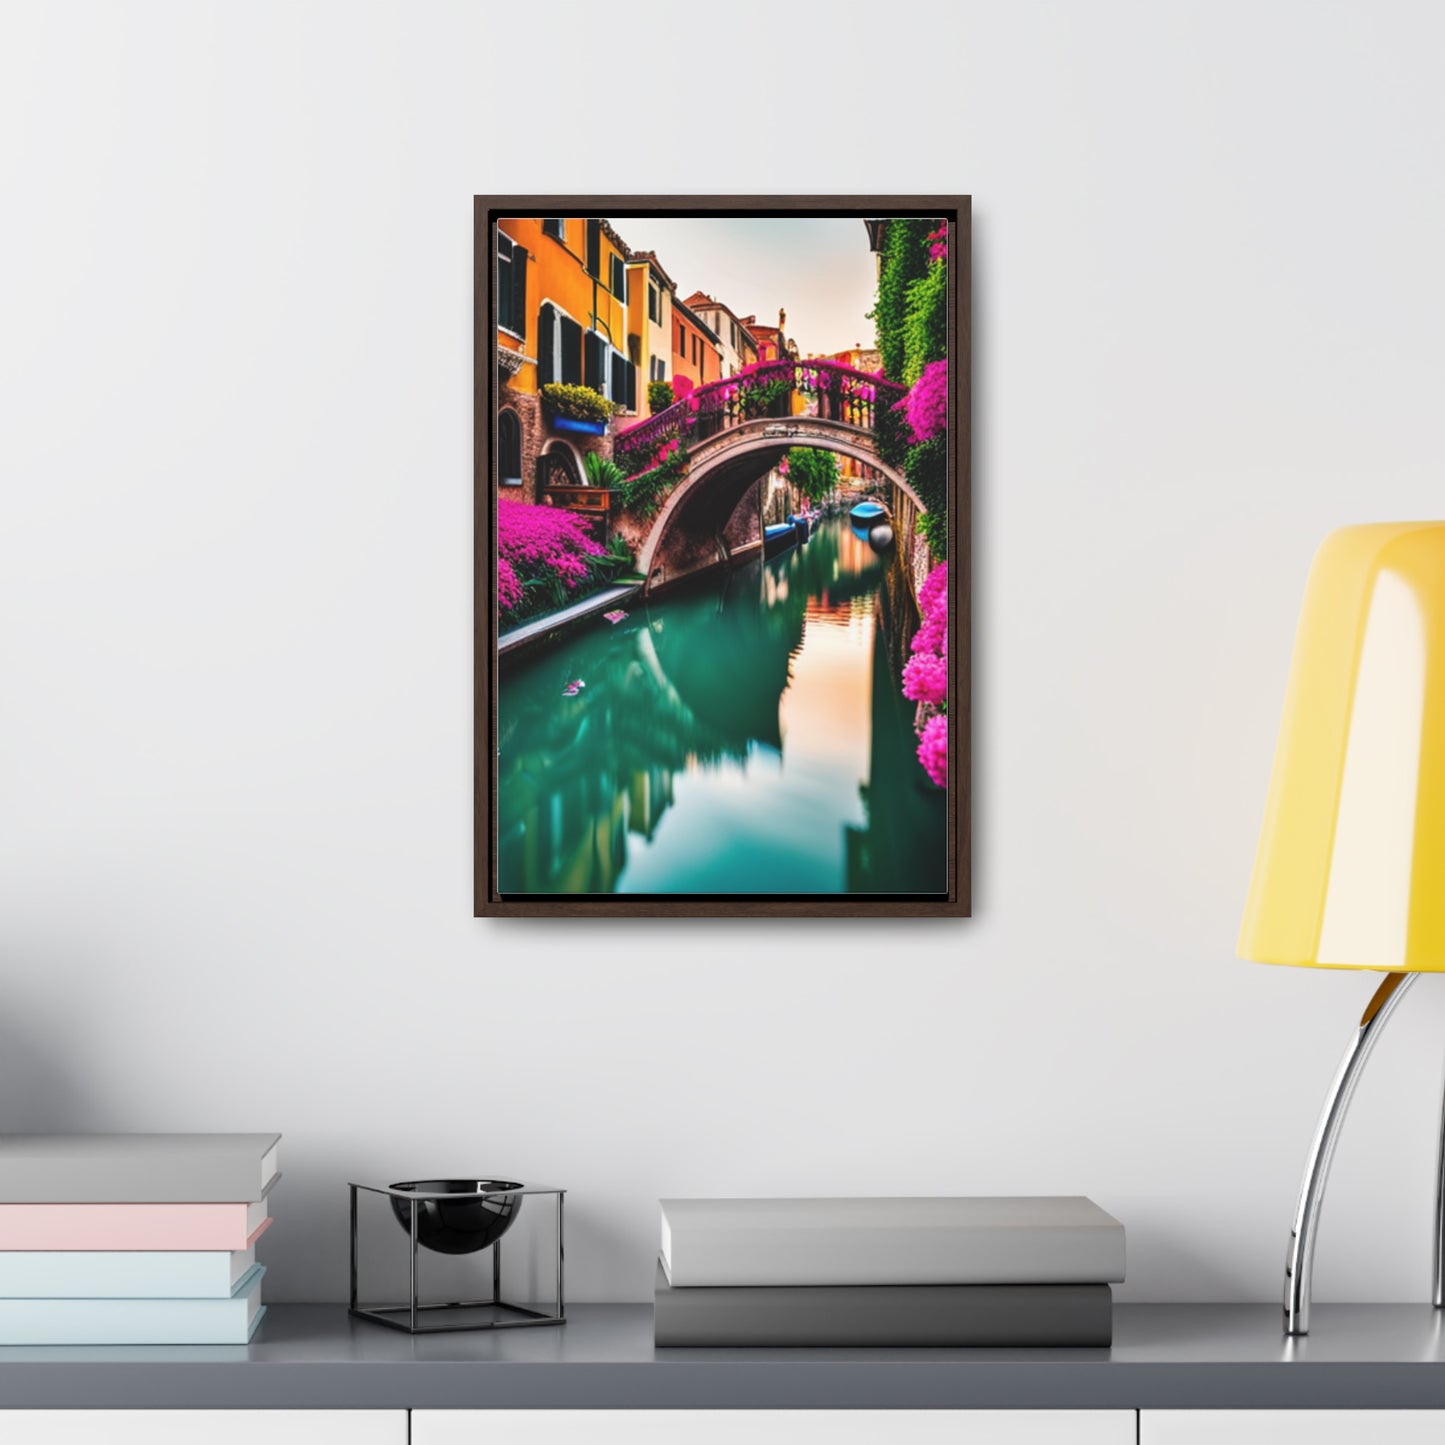 A colorful Venice inspired depiction on this gallery canvas wrap with vertical frame. Sizes vary.